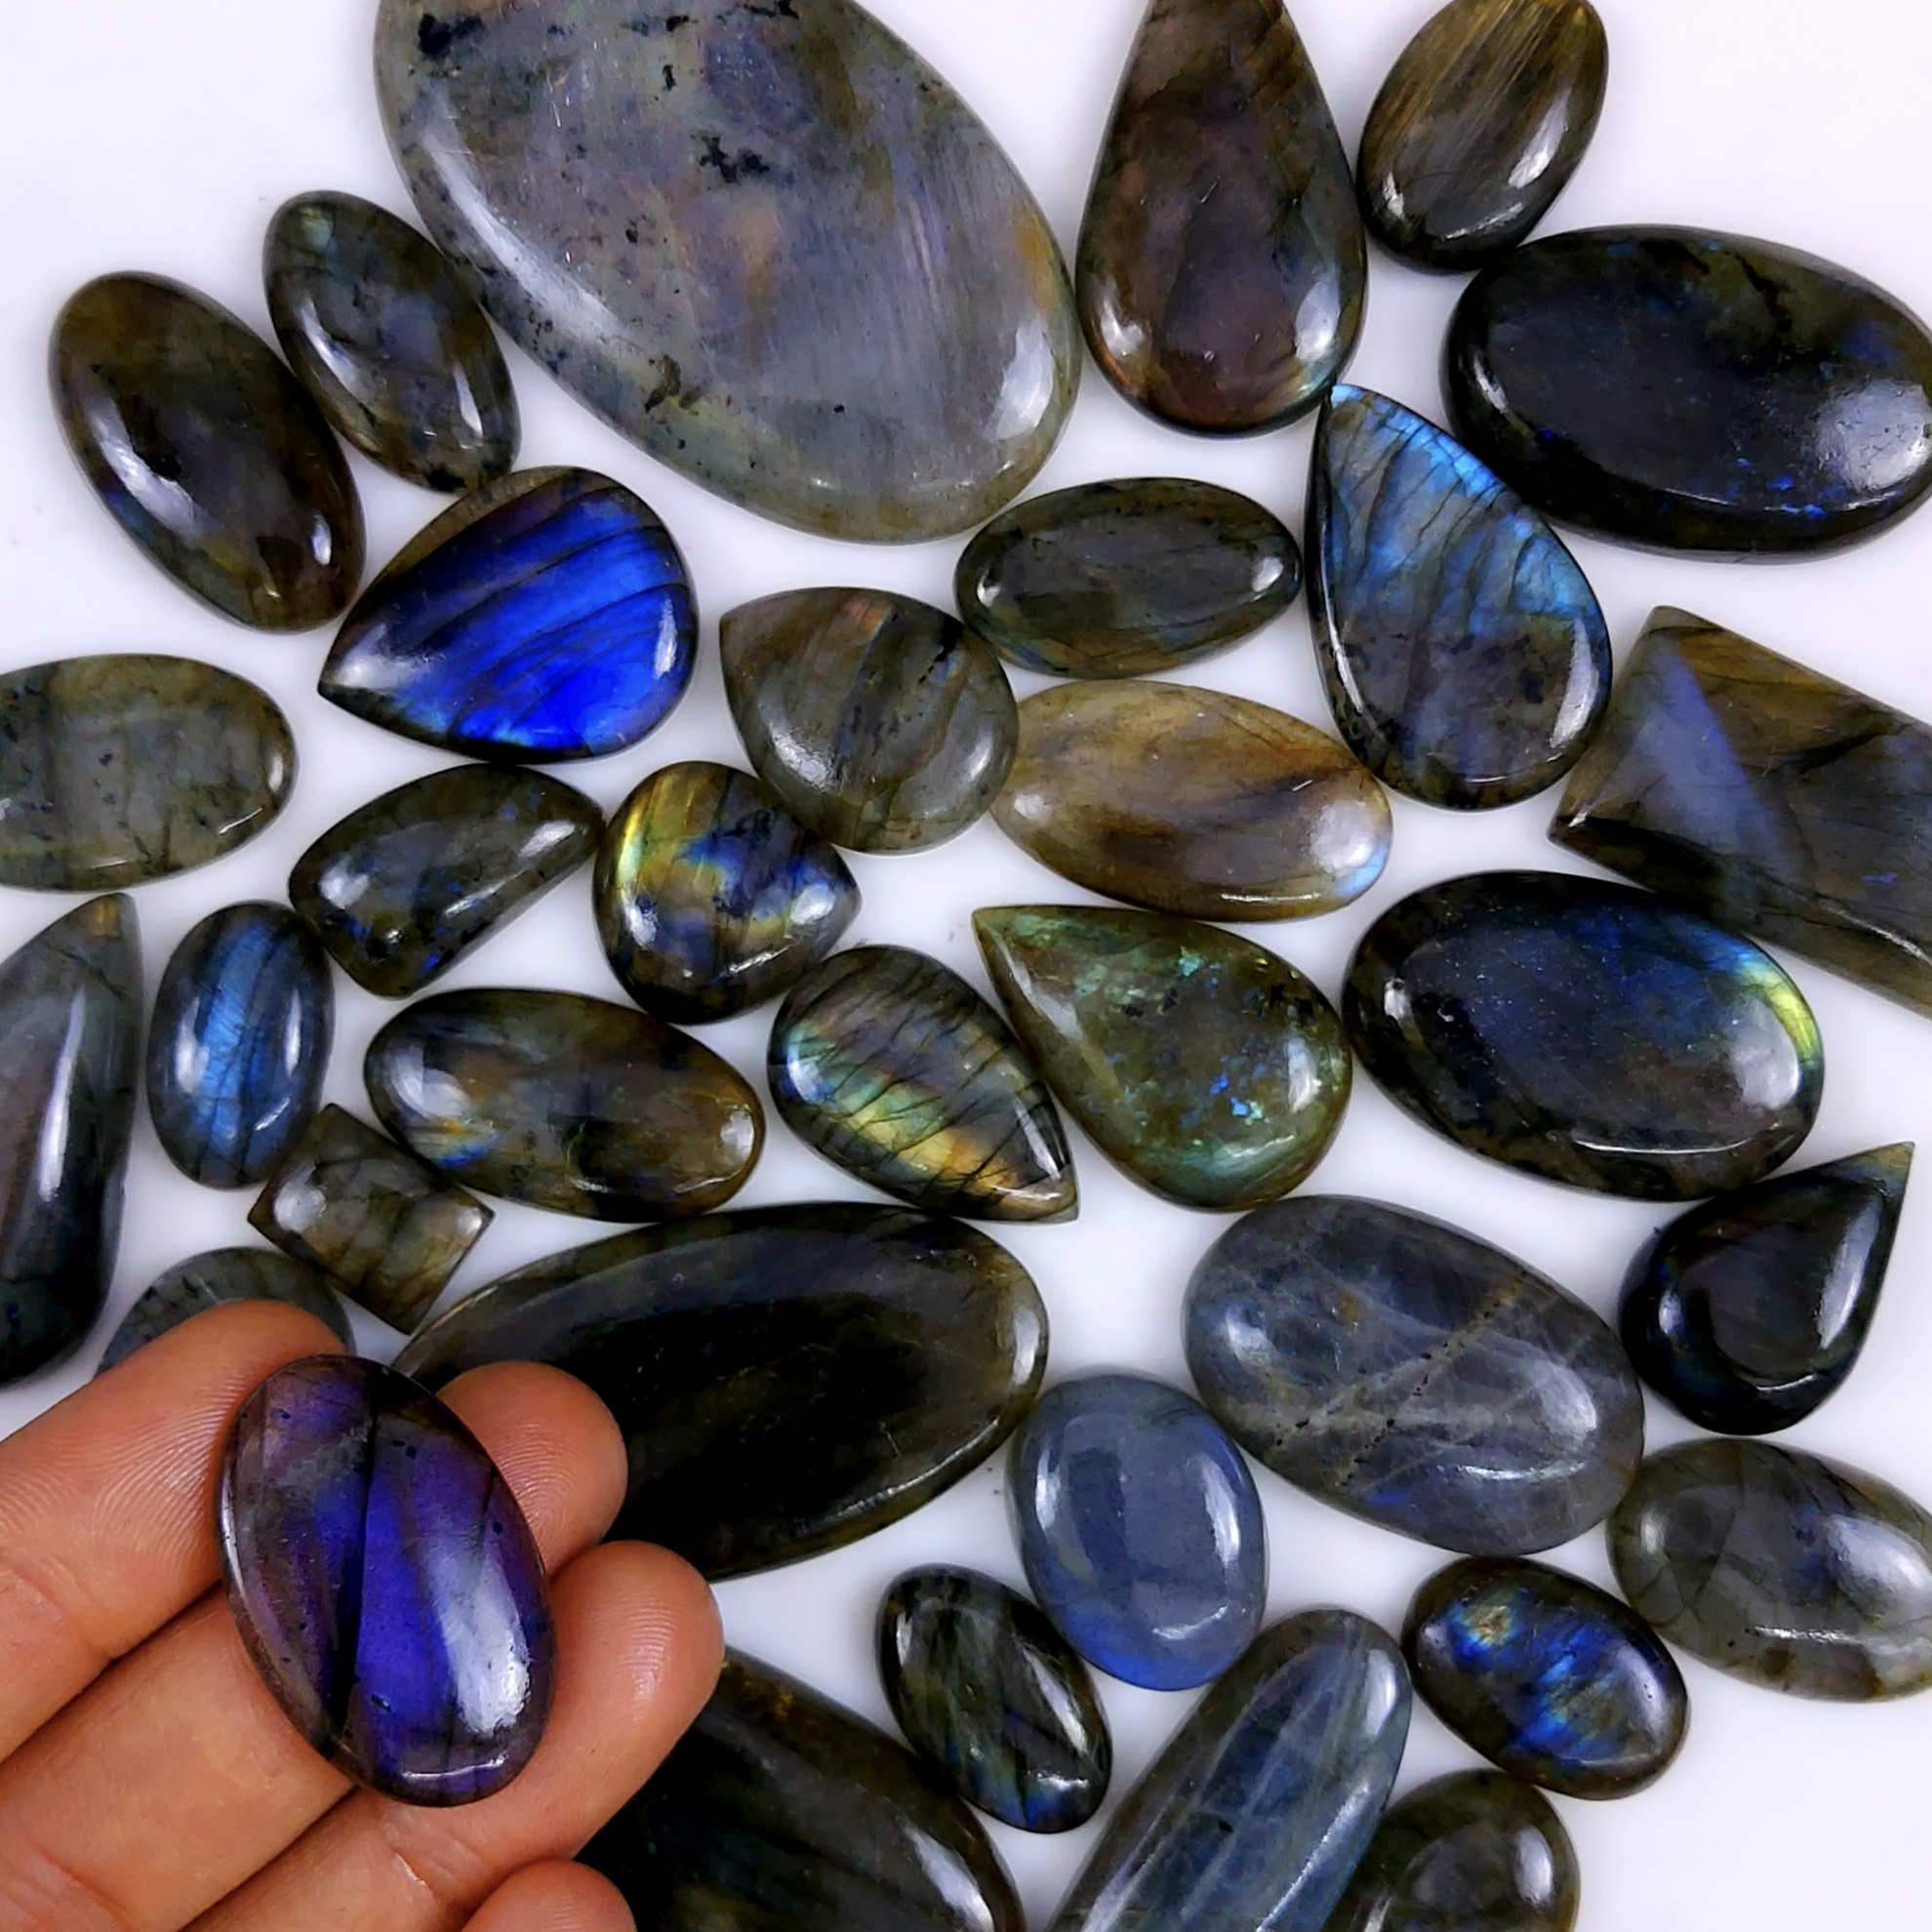 41pc 1612Cts Labradorite Cabochon Multifire Healing Crystal For Jewelry Supplies, Labradorite Necklace Handmade Wire Wrapped Gemstone Pendant 48x34 22x14mm#6352